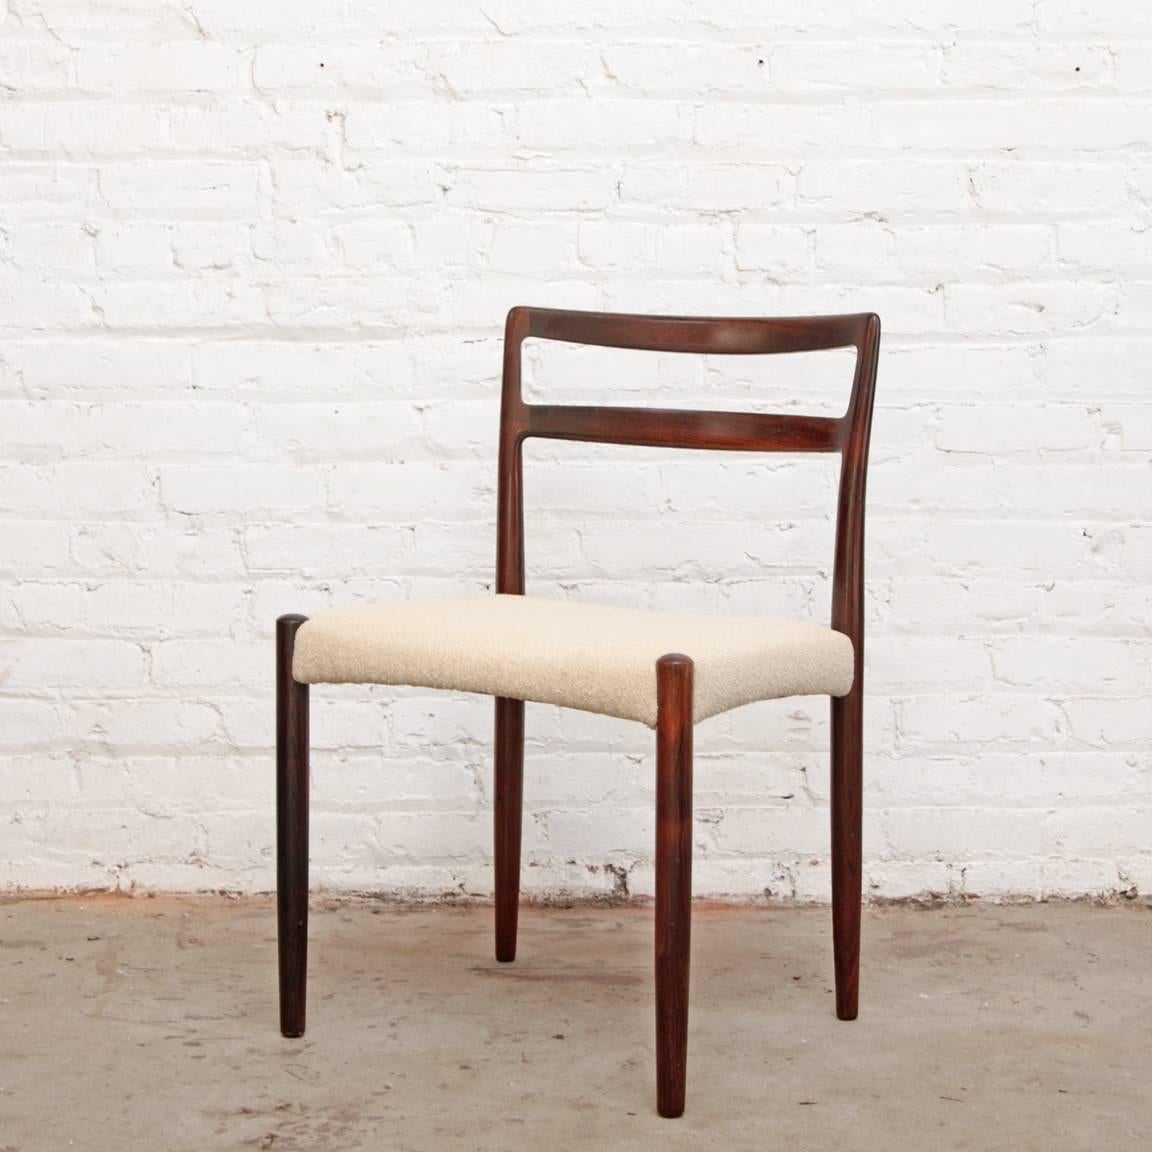 Set of four sculpted rosewood dining chairs by Niels Moller. Recently reupholstered in off white wool boucle.